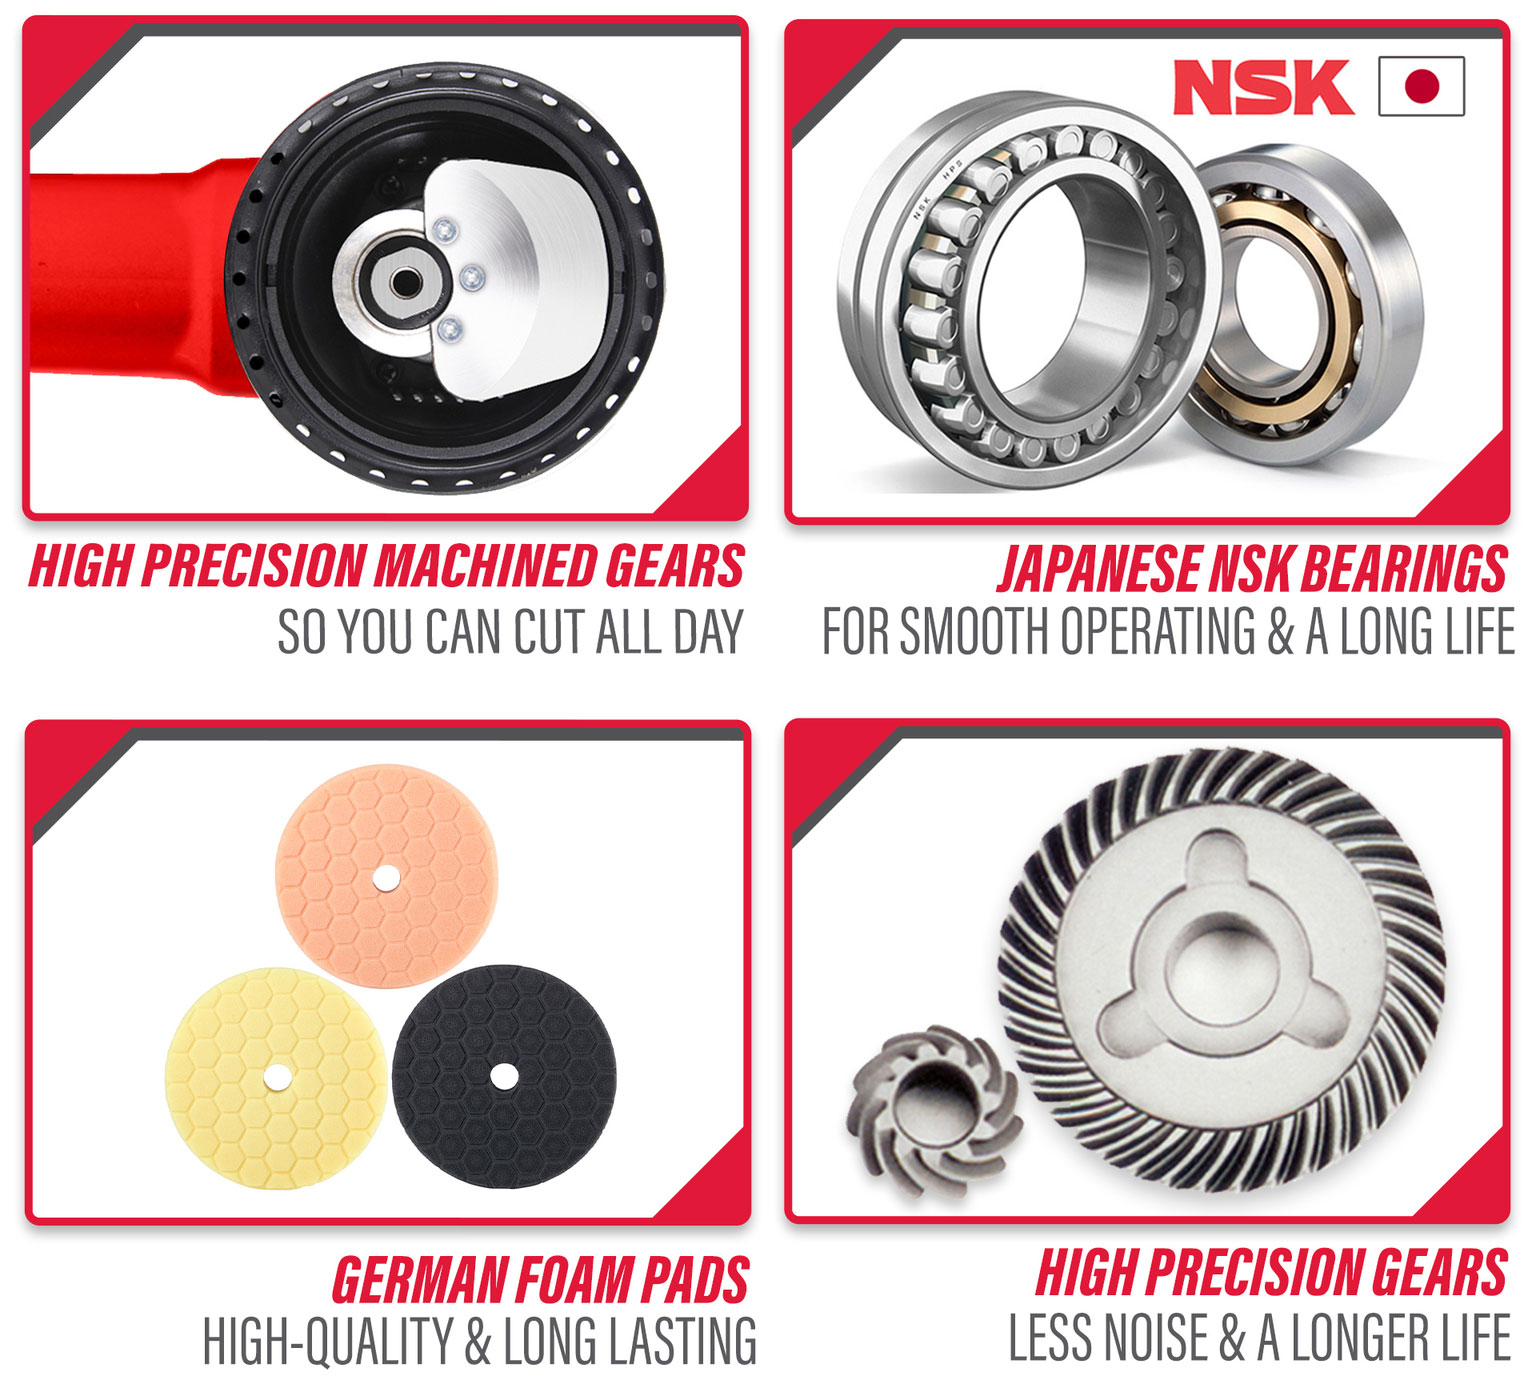 High Precision Machined gears, so you can cut all day. 
        Japanese NSK Bearings for smooth operathing & A long life.
        German foam pads High-Quality & Long lasting.
        High Precision gears, less noise & A longer life